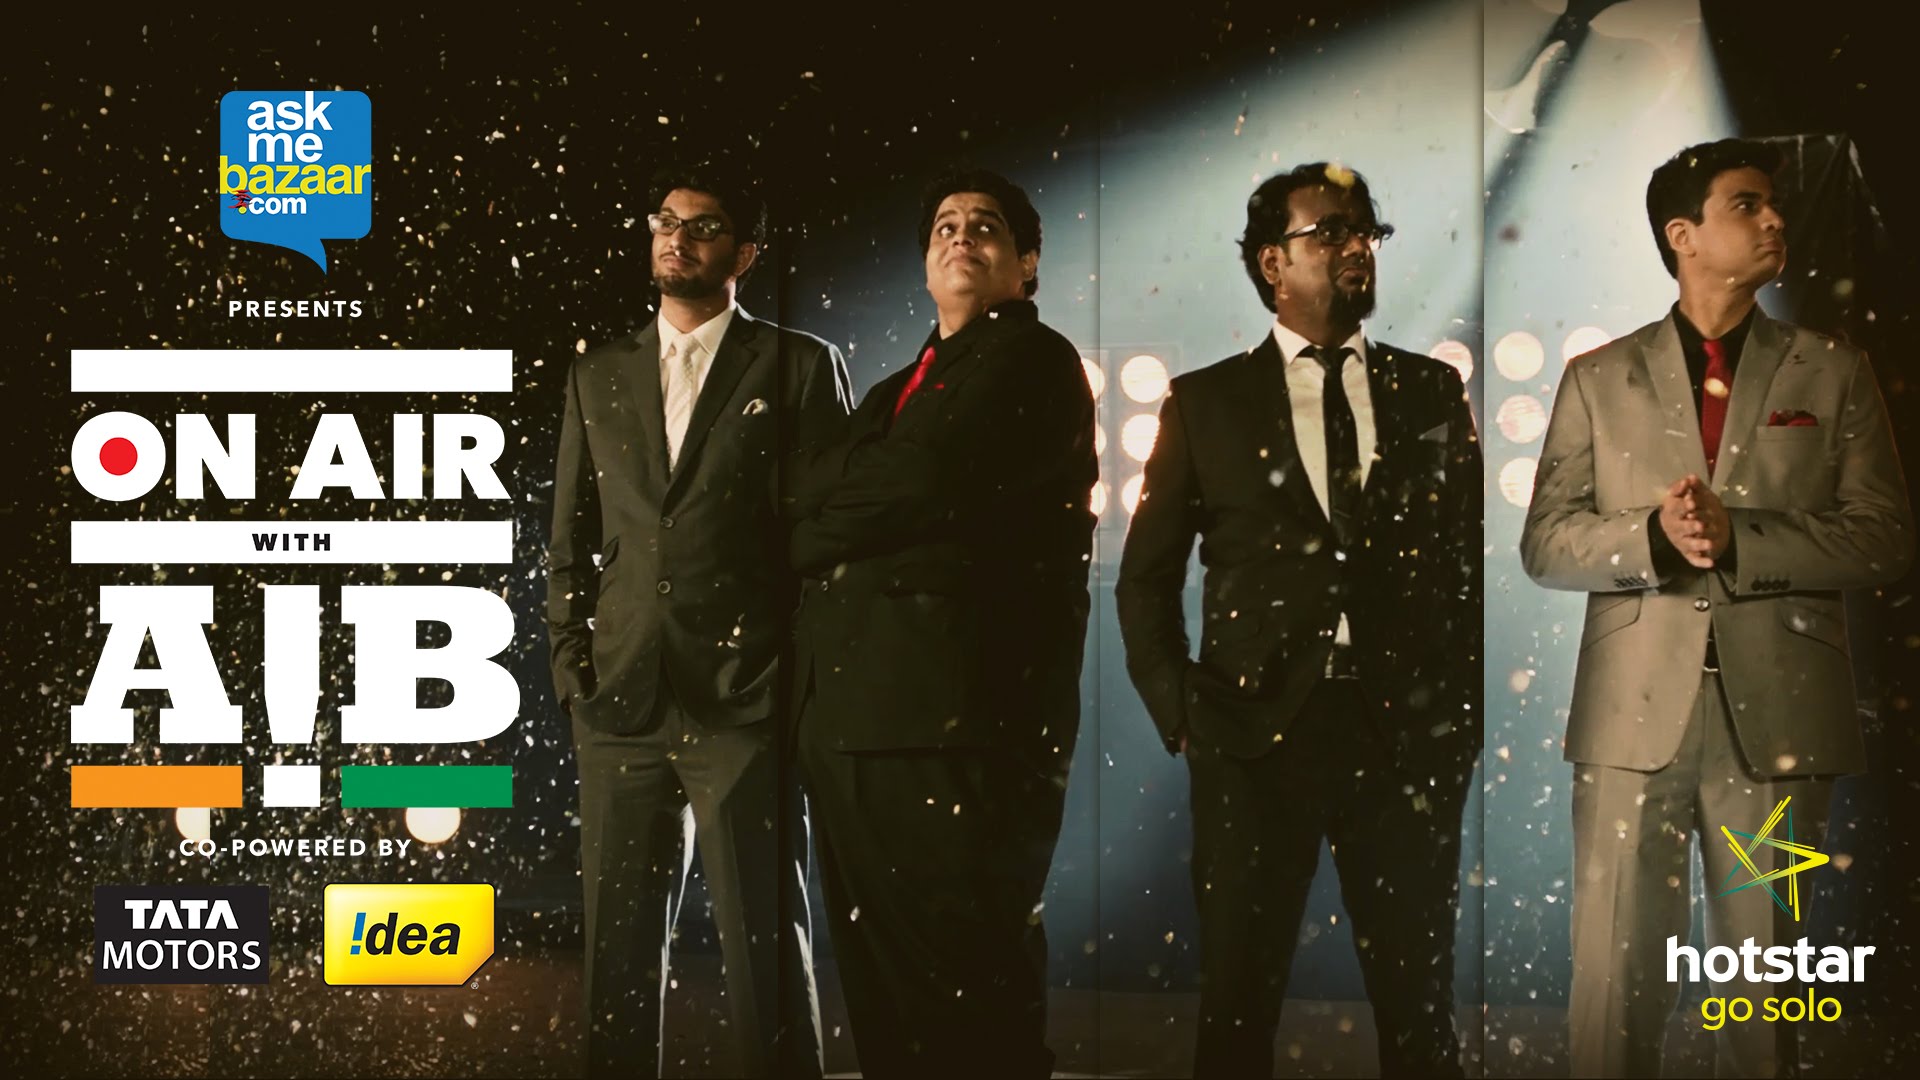 On Air With AIB – Season 3 out now